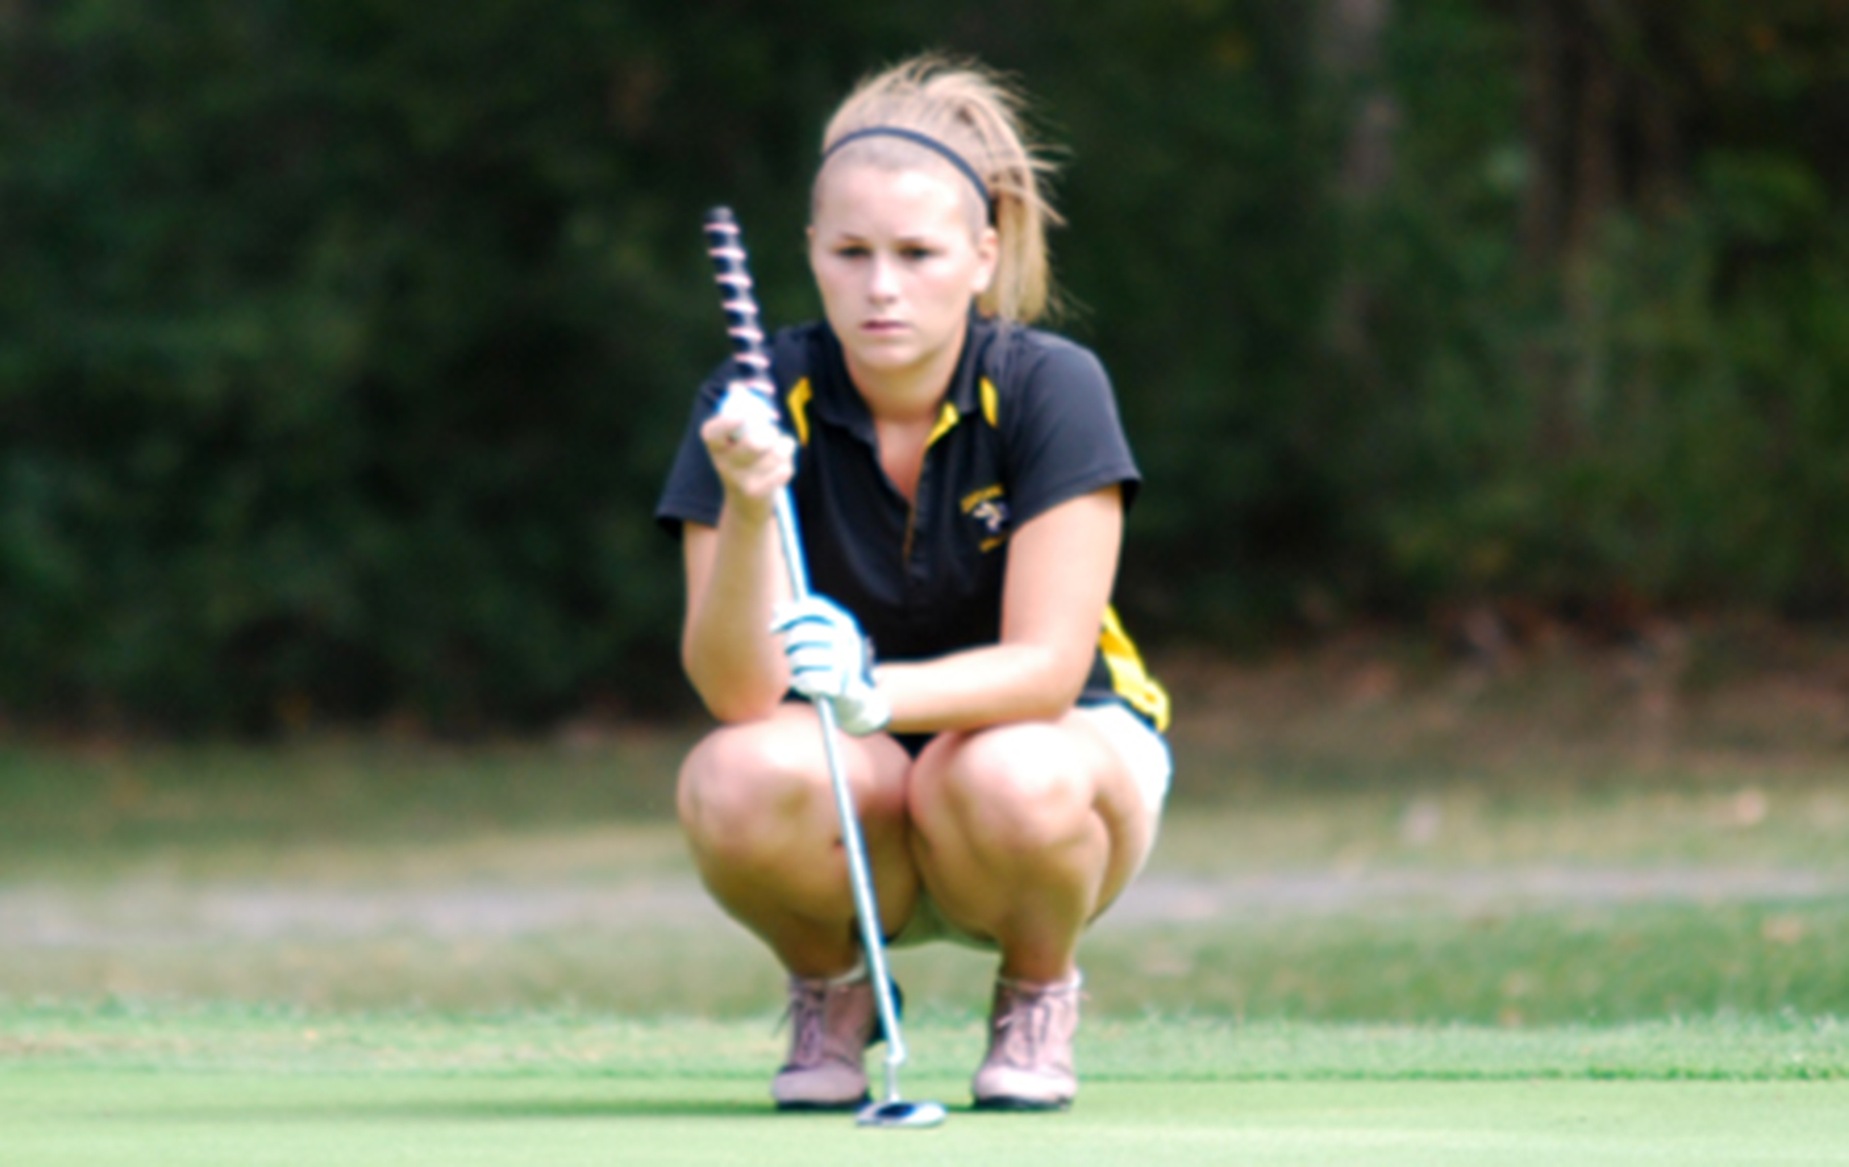 DC Takes Final Round Before HCAC Championships